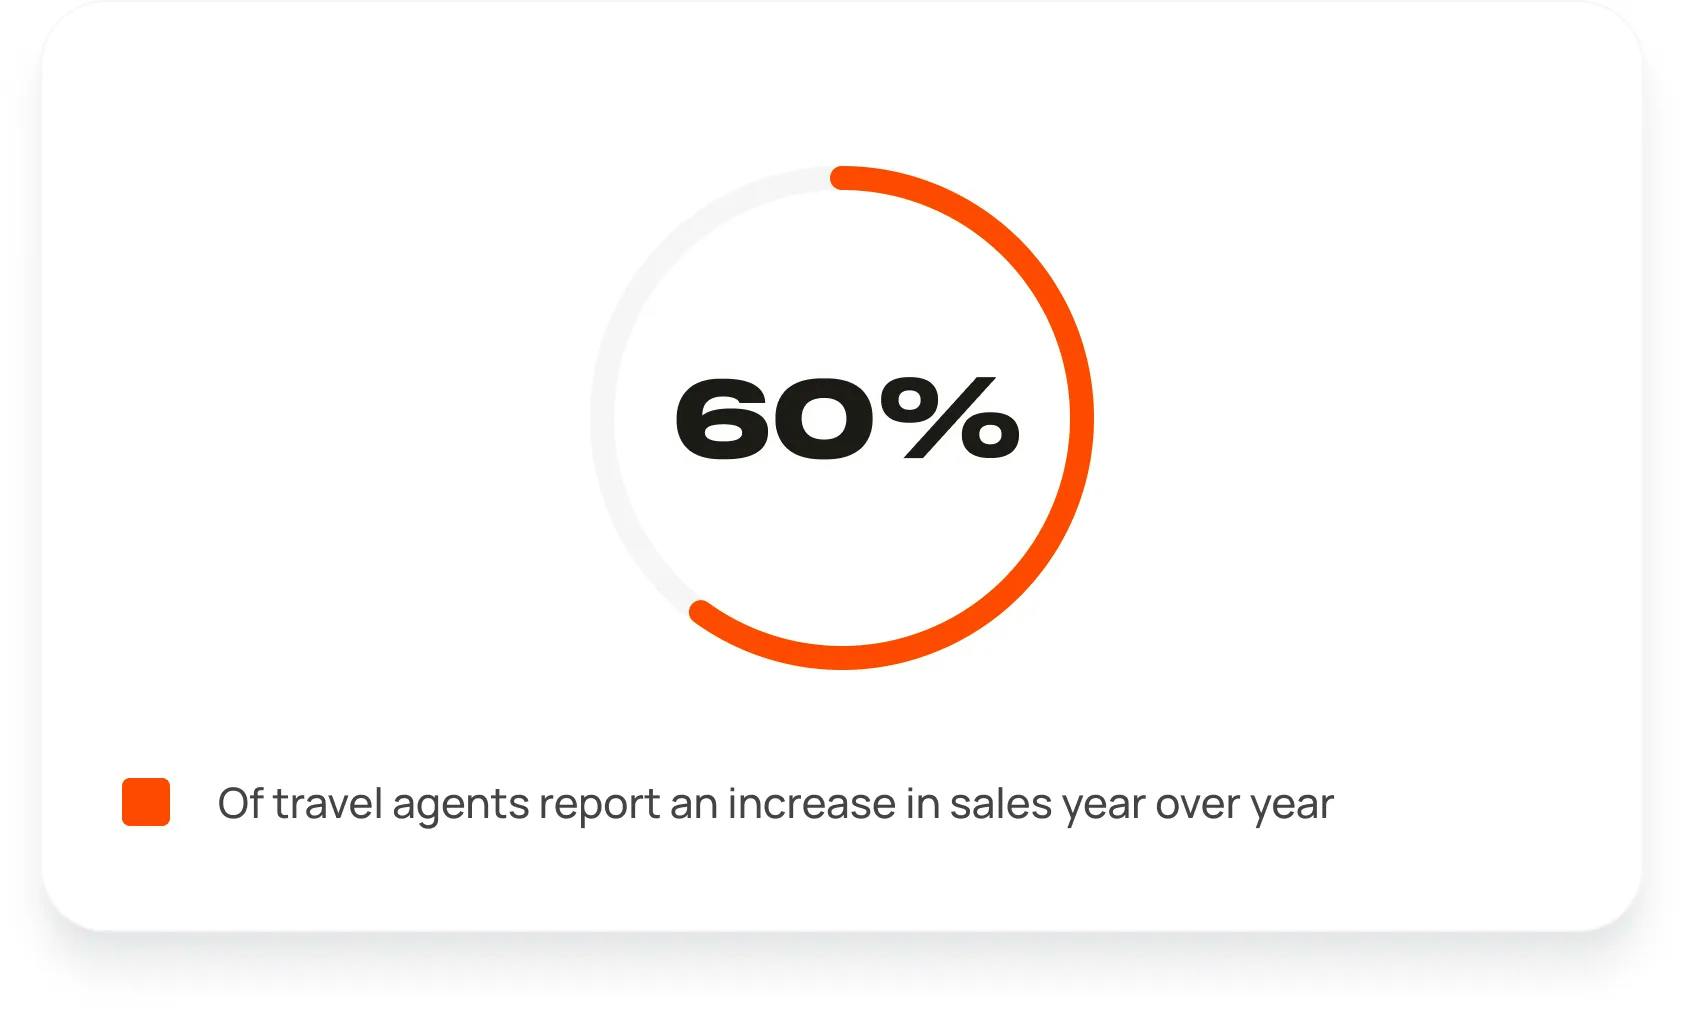 60% of travel agents report an increase in sales year over year